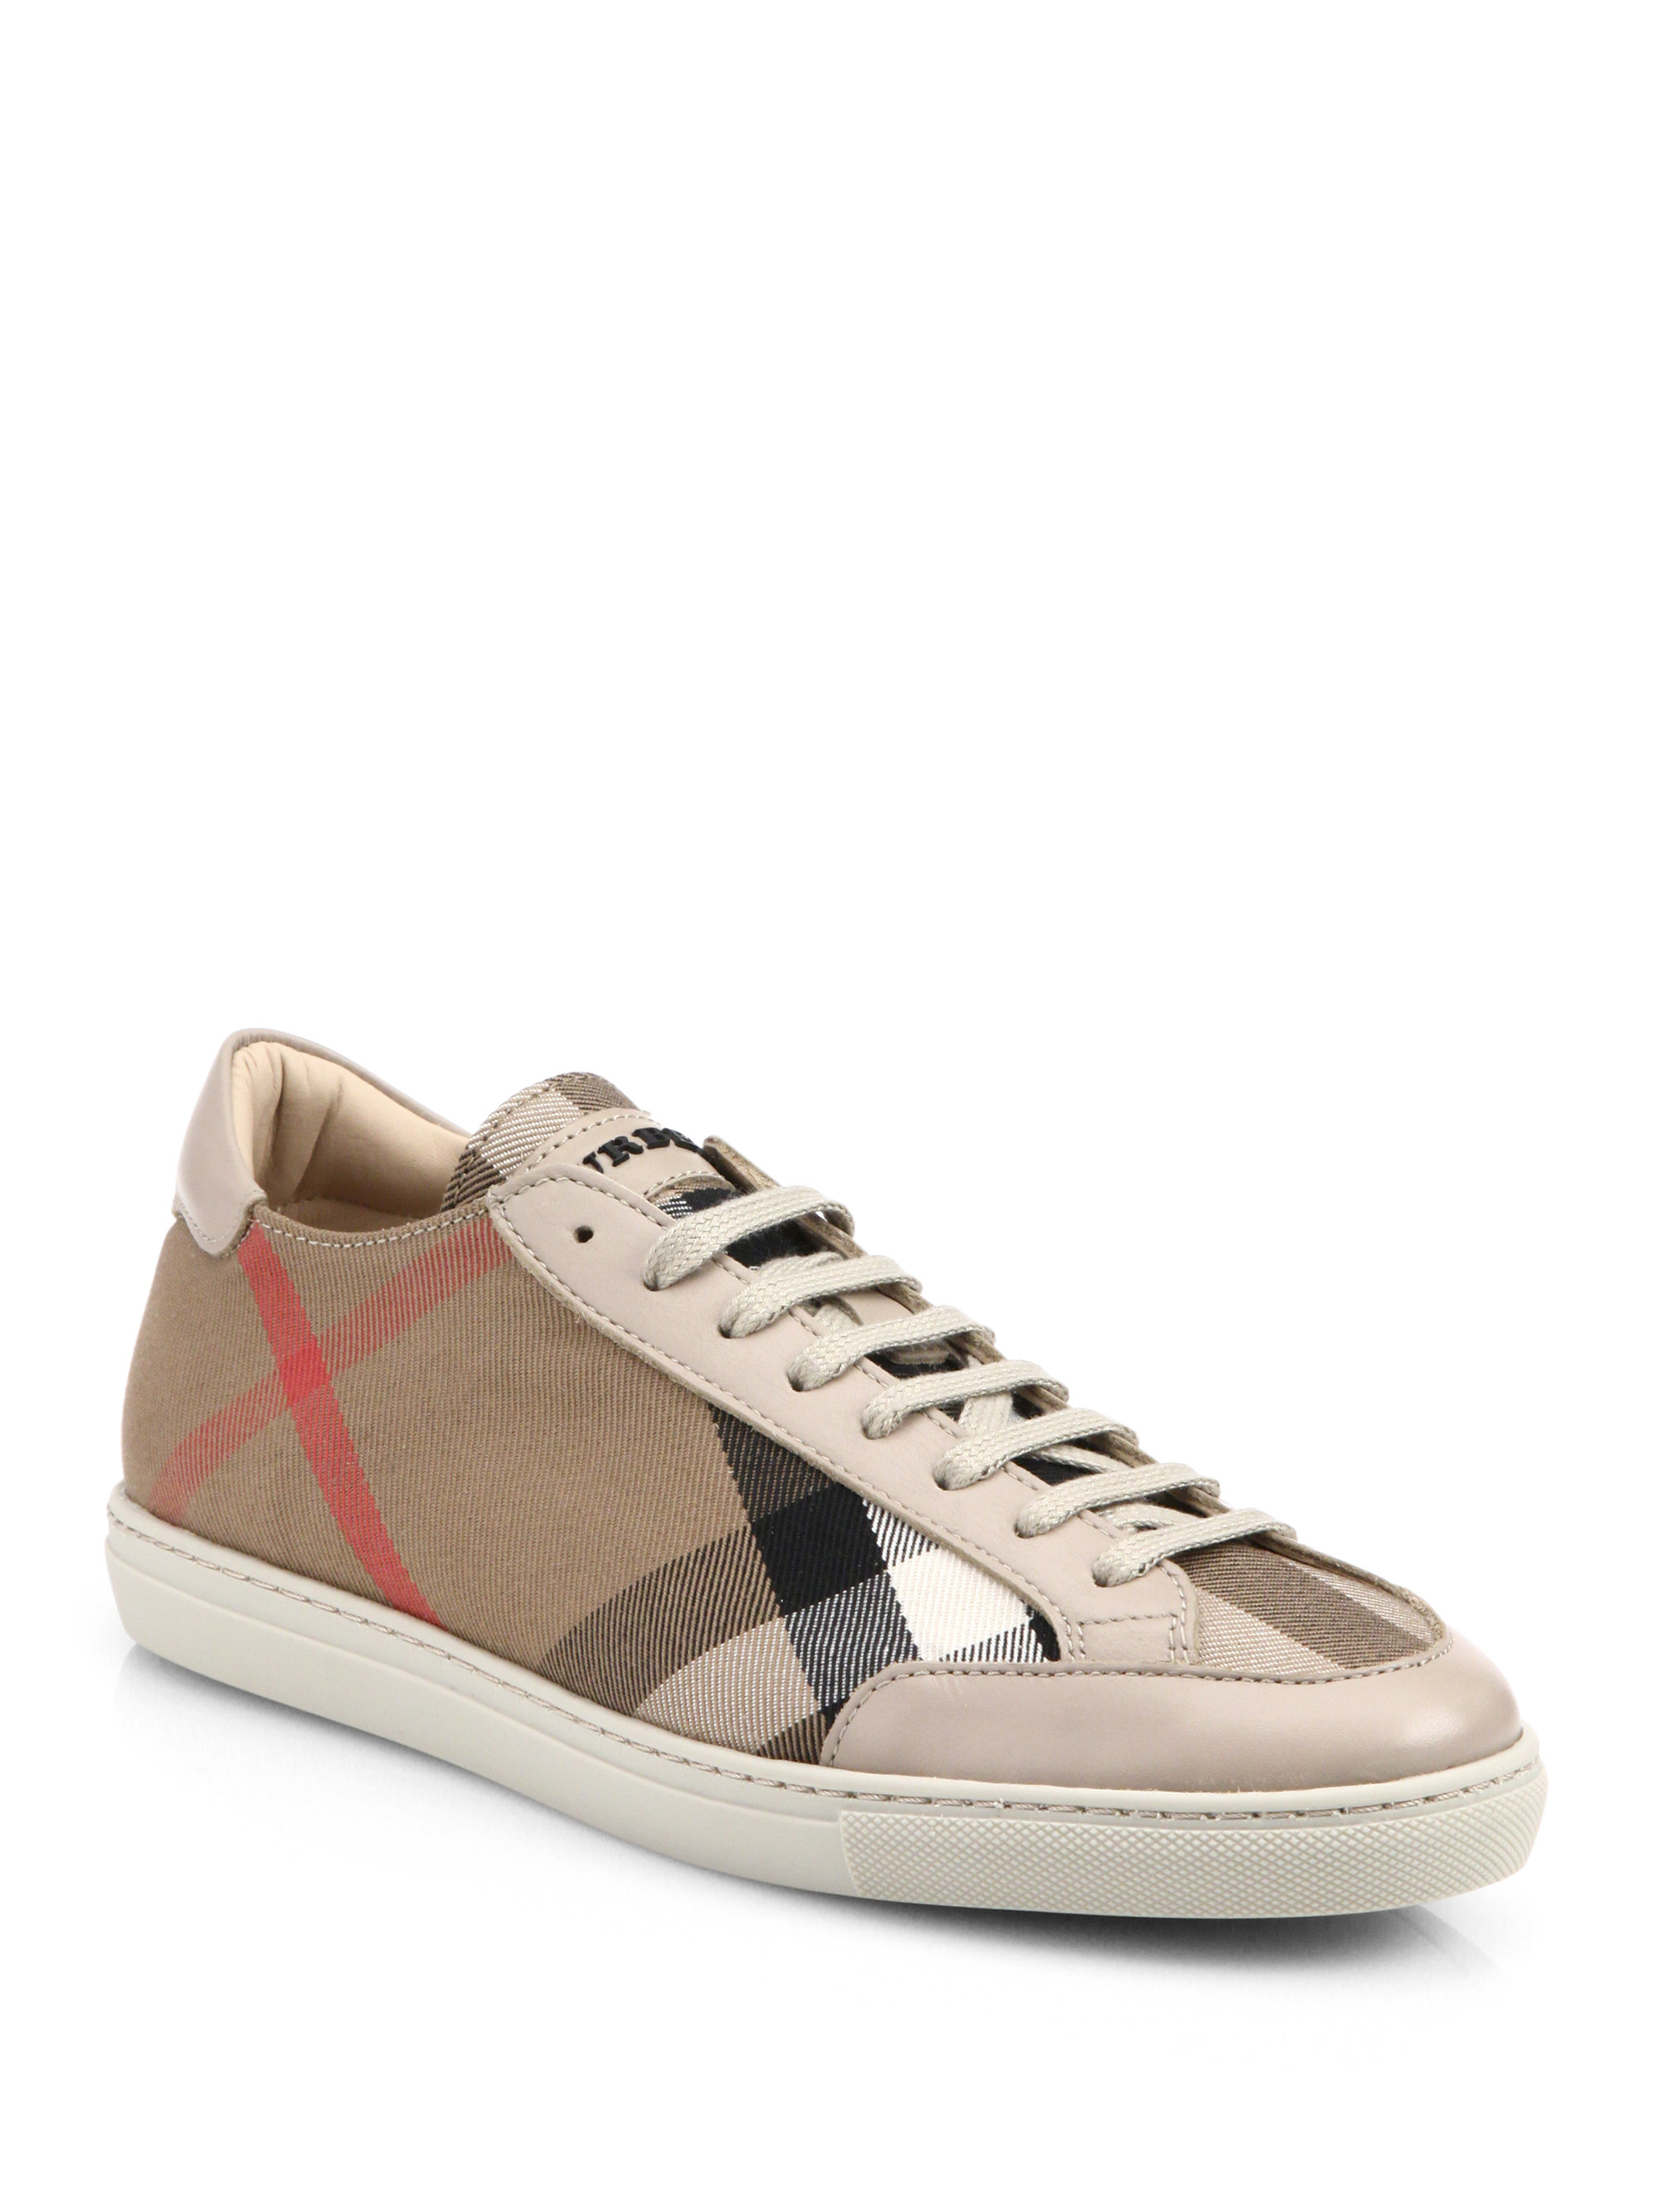 saks fifth avenue burberry shoes